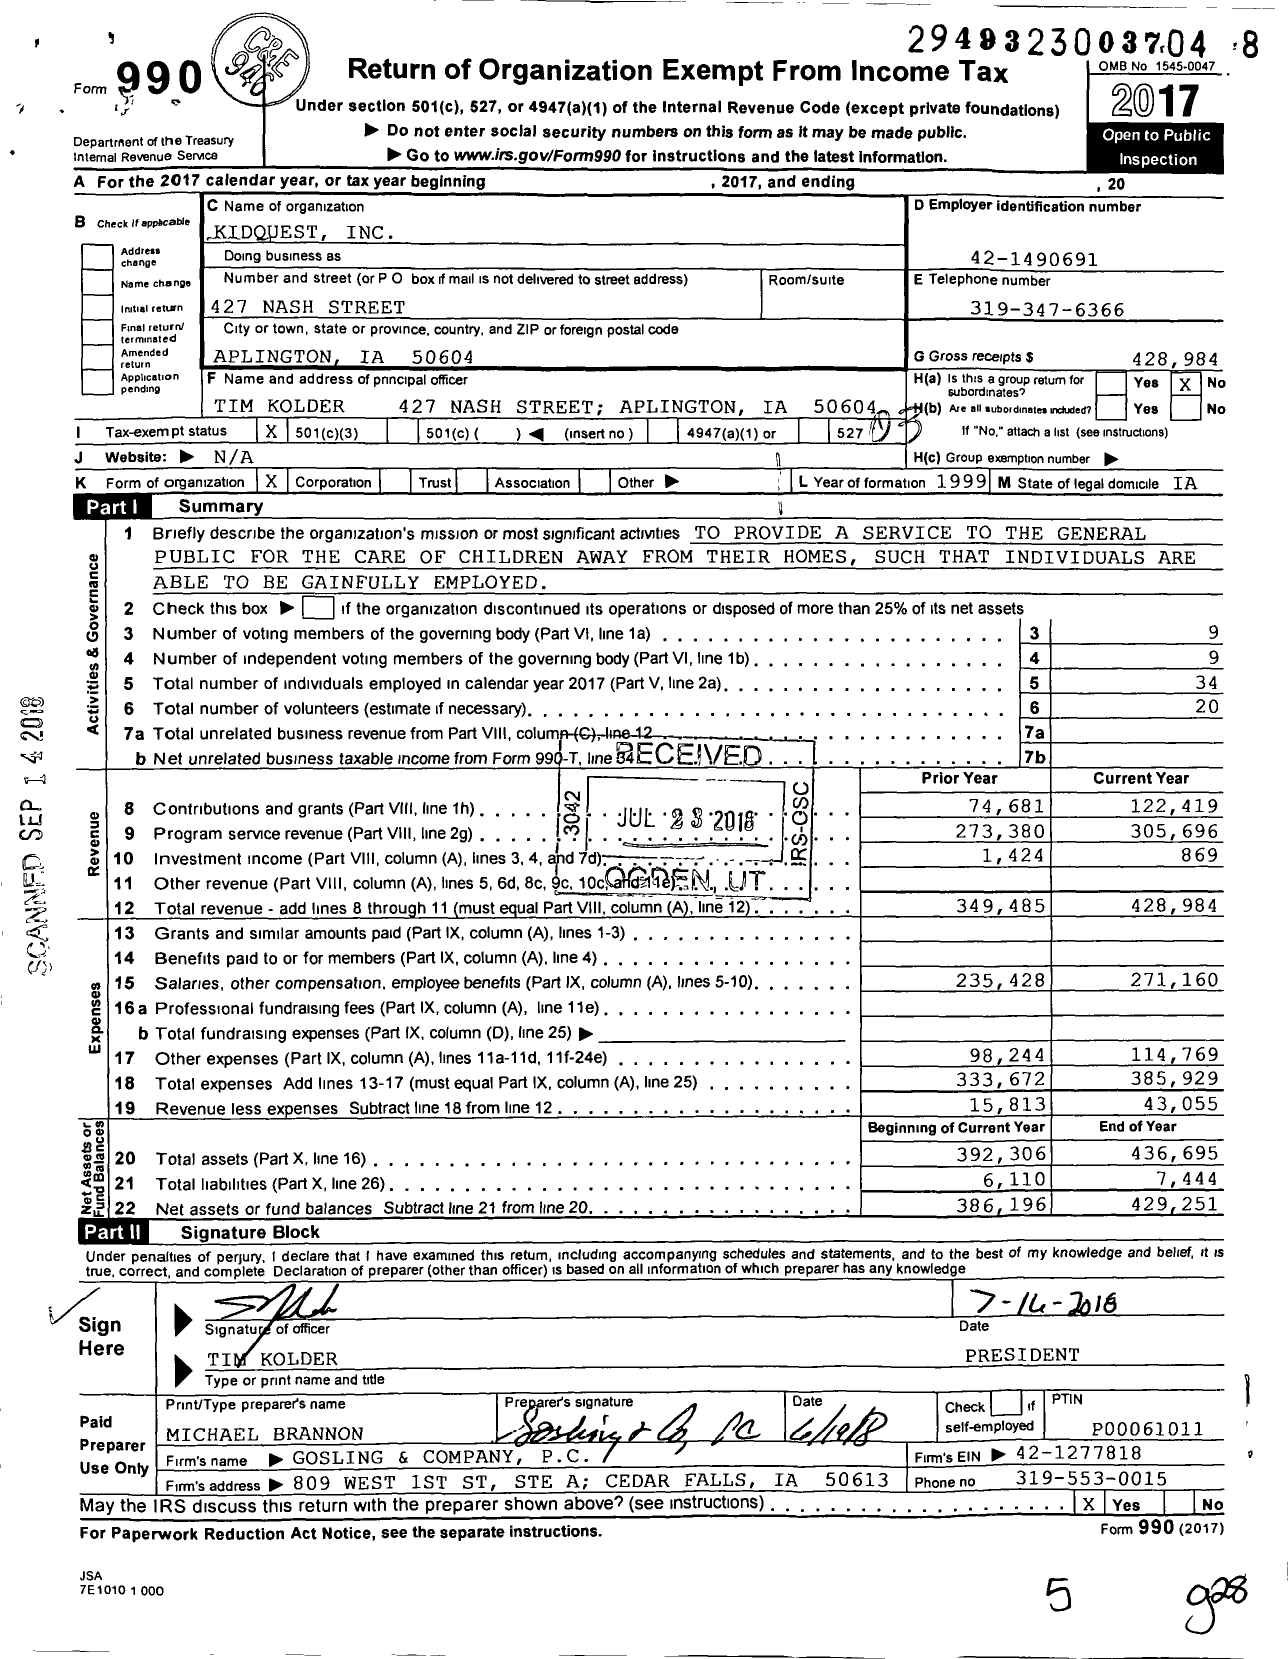 Image of first page of 2017 Form 990 for Kidquest